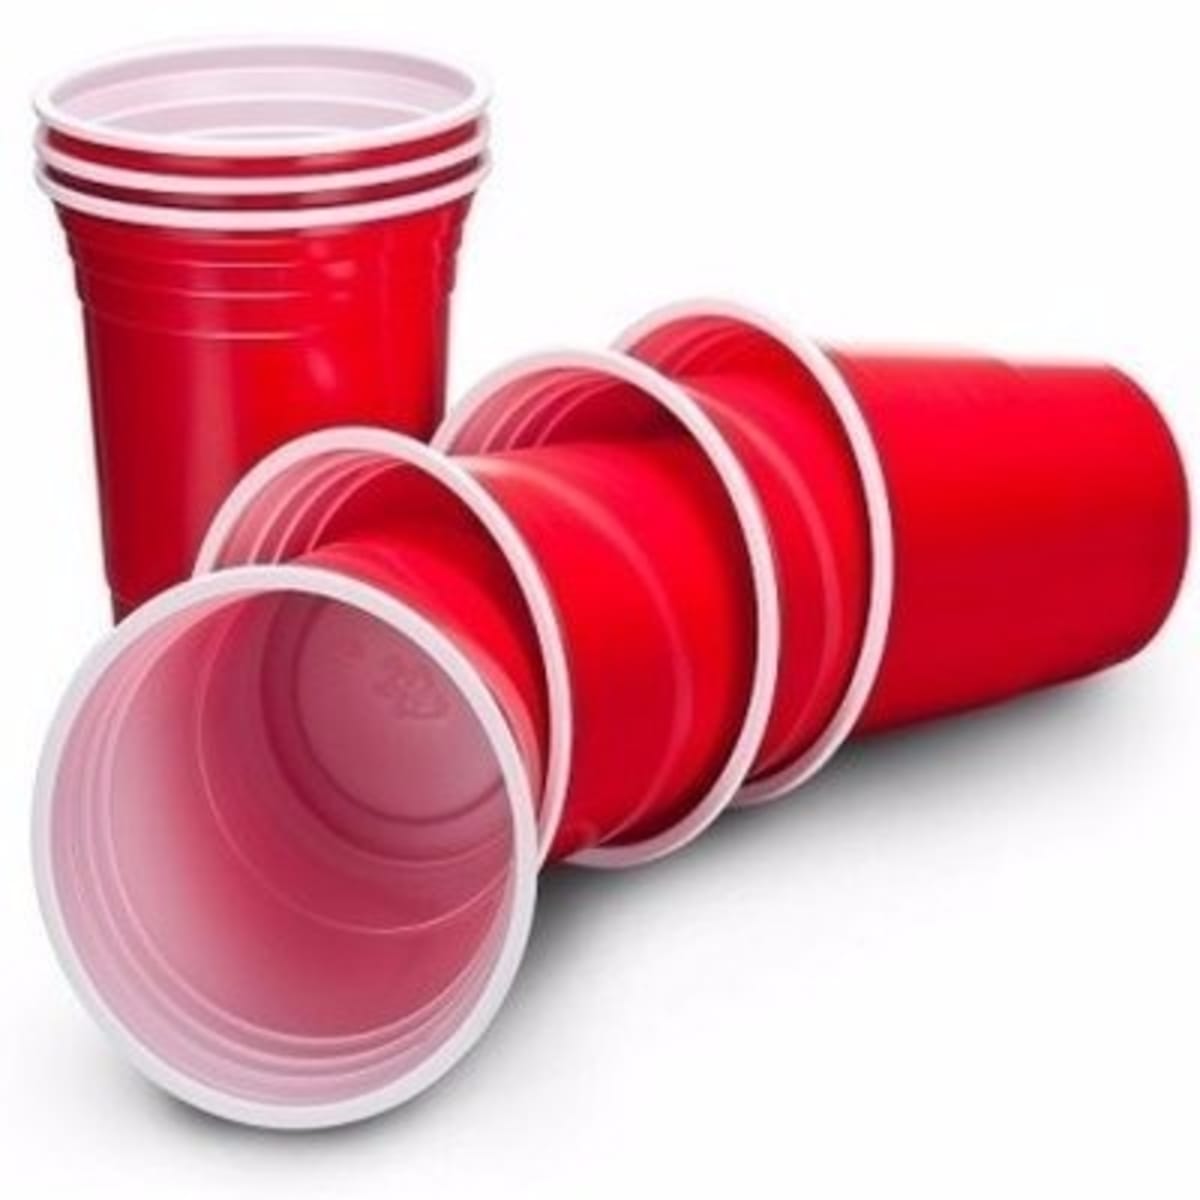 https://www-konga-com-res.cloudinary.com/w_400,f_auto,fl_lossy,dpr_3.0,q_auto/media/catalog/product/D/i/Disposable-Cups---Red-and-White---Pack-Of-25-7139784_1.jpg